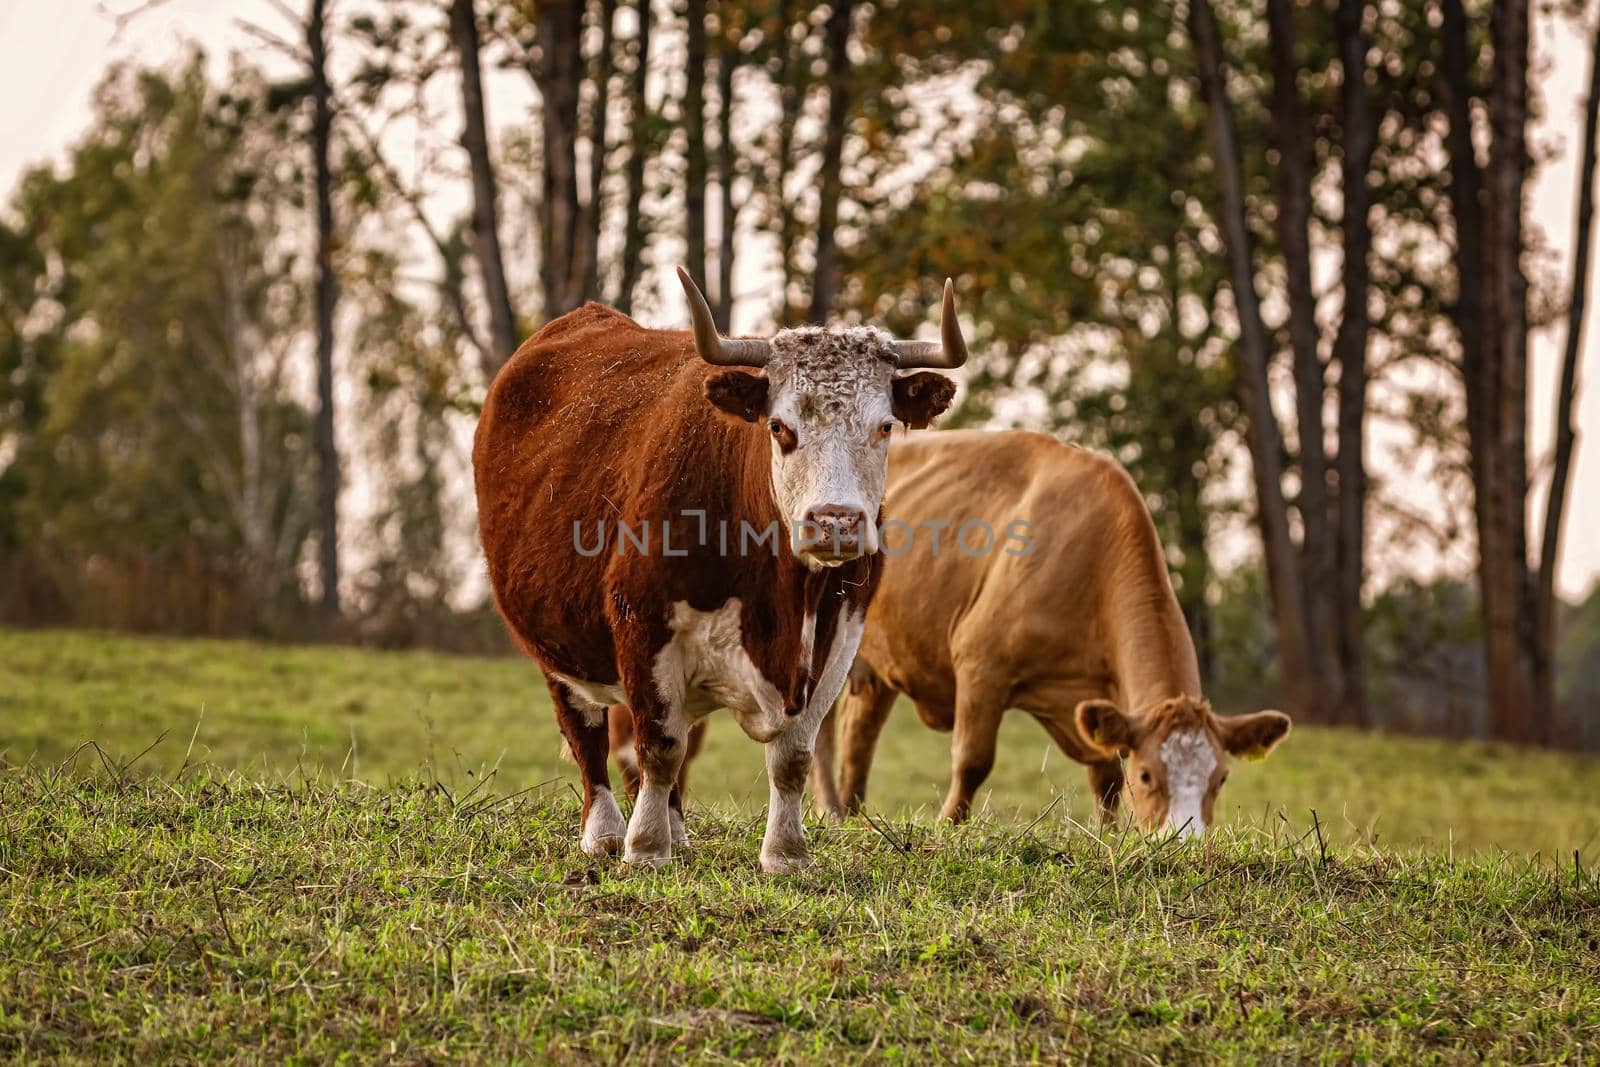 Cows on the pasture by SNR